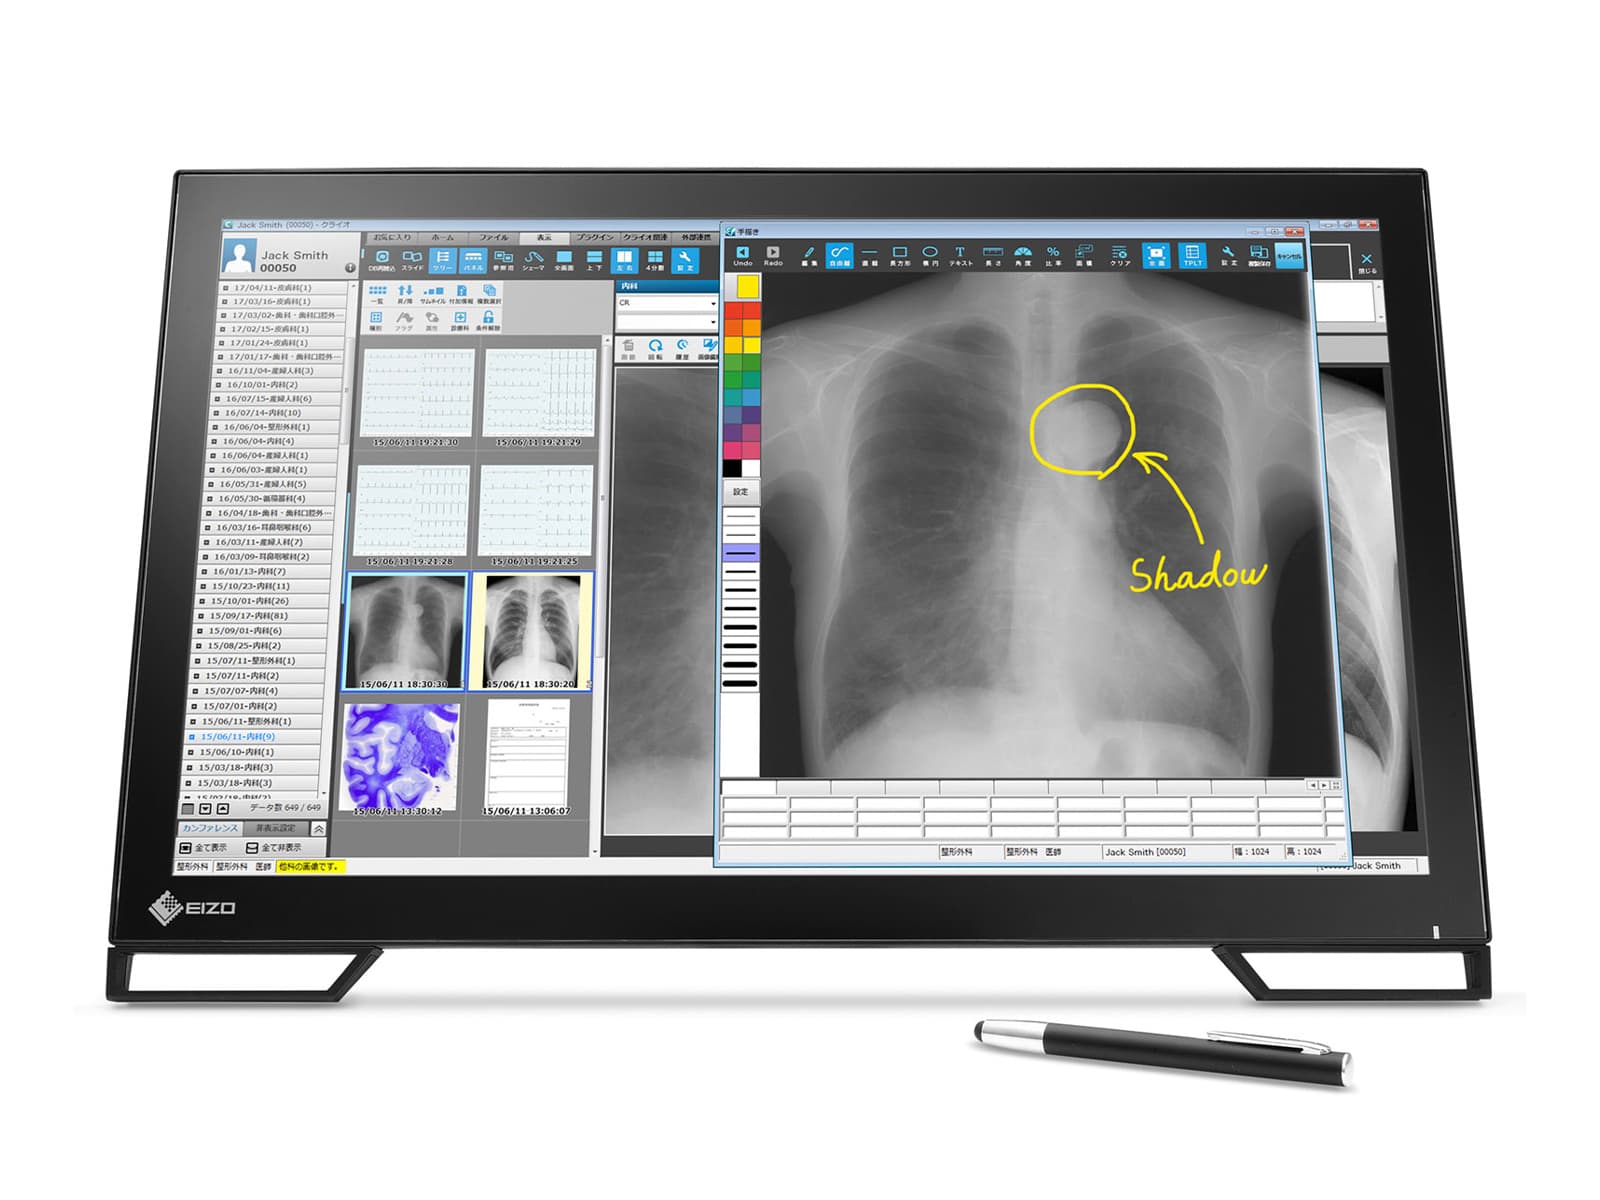 Eizo Radiforce MS236WT Multi-Touch Clinical Review LCD-Dentalmonitor mit Eingabestift (MS236WT)